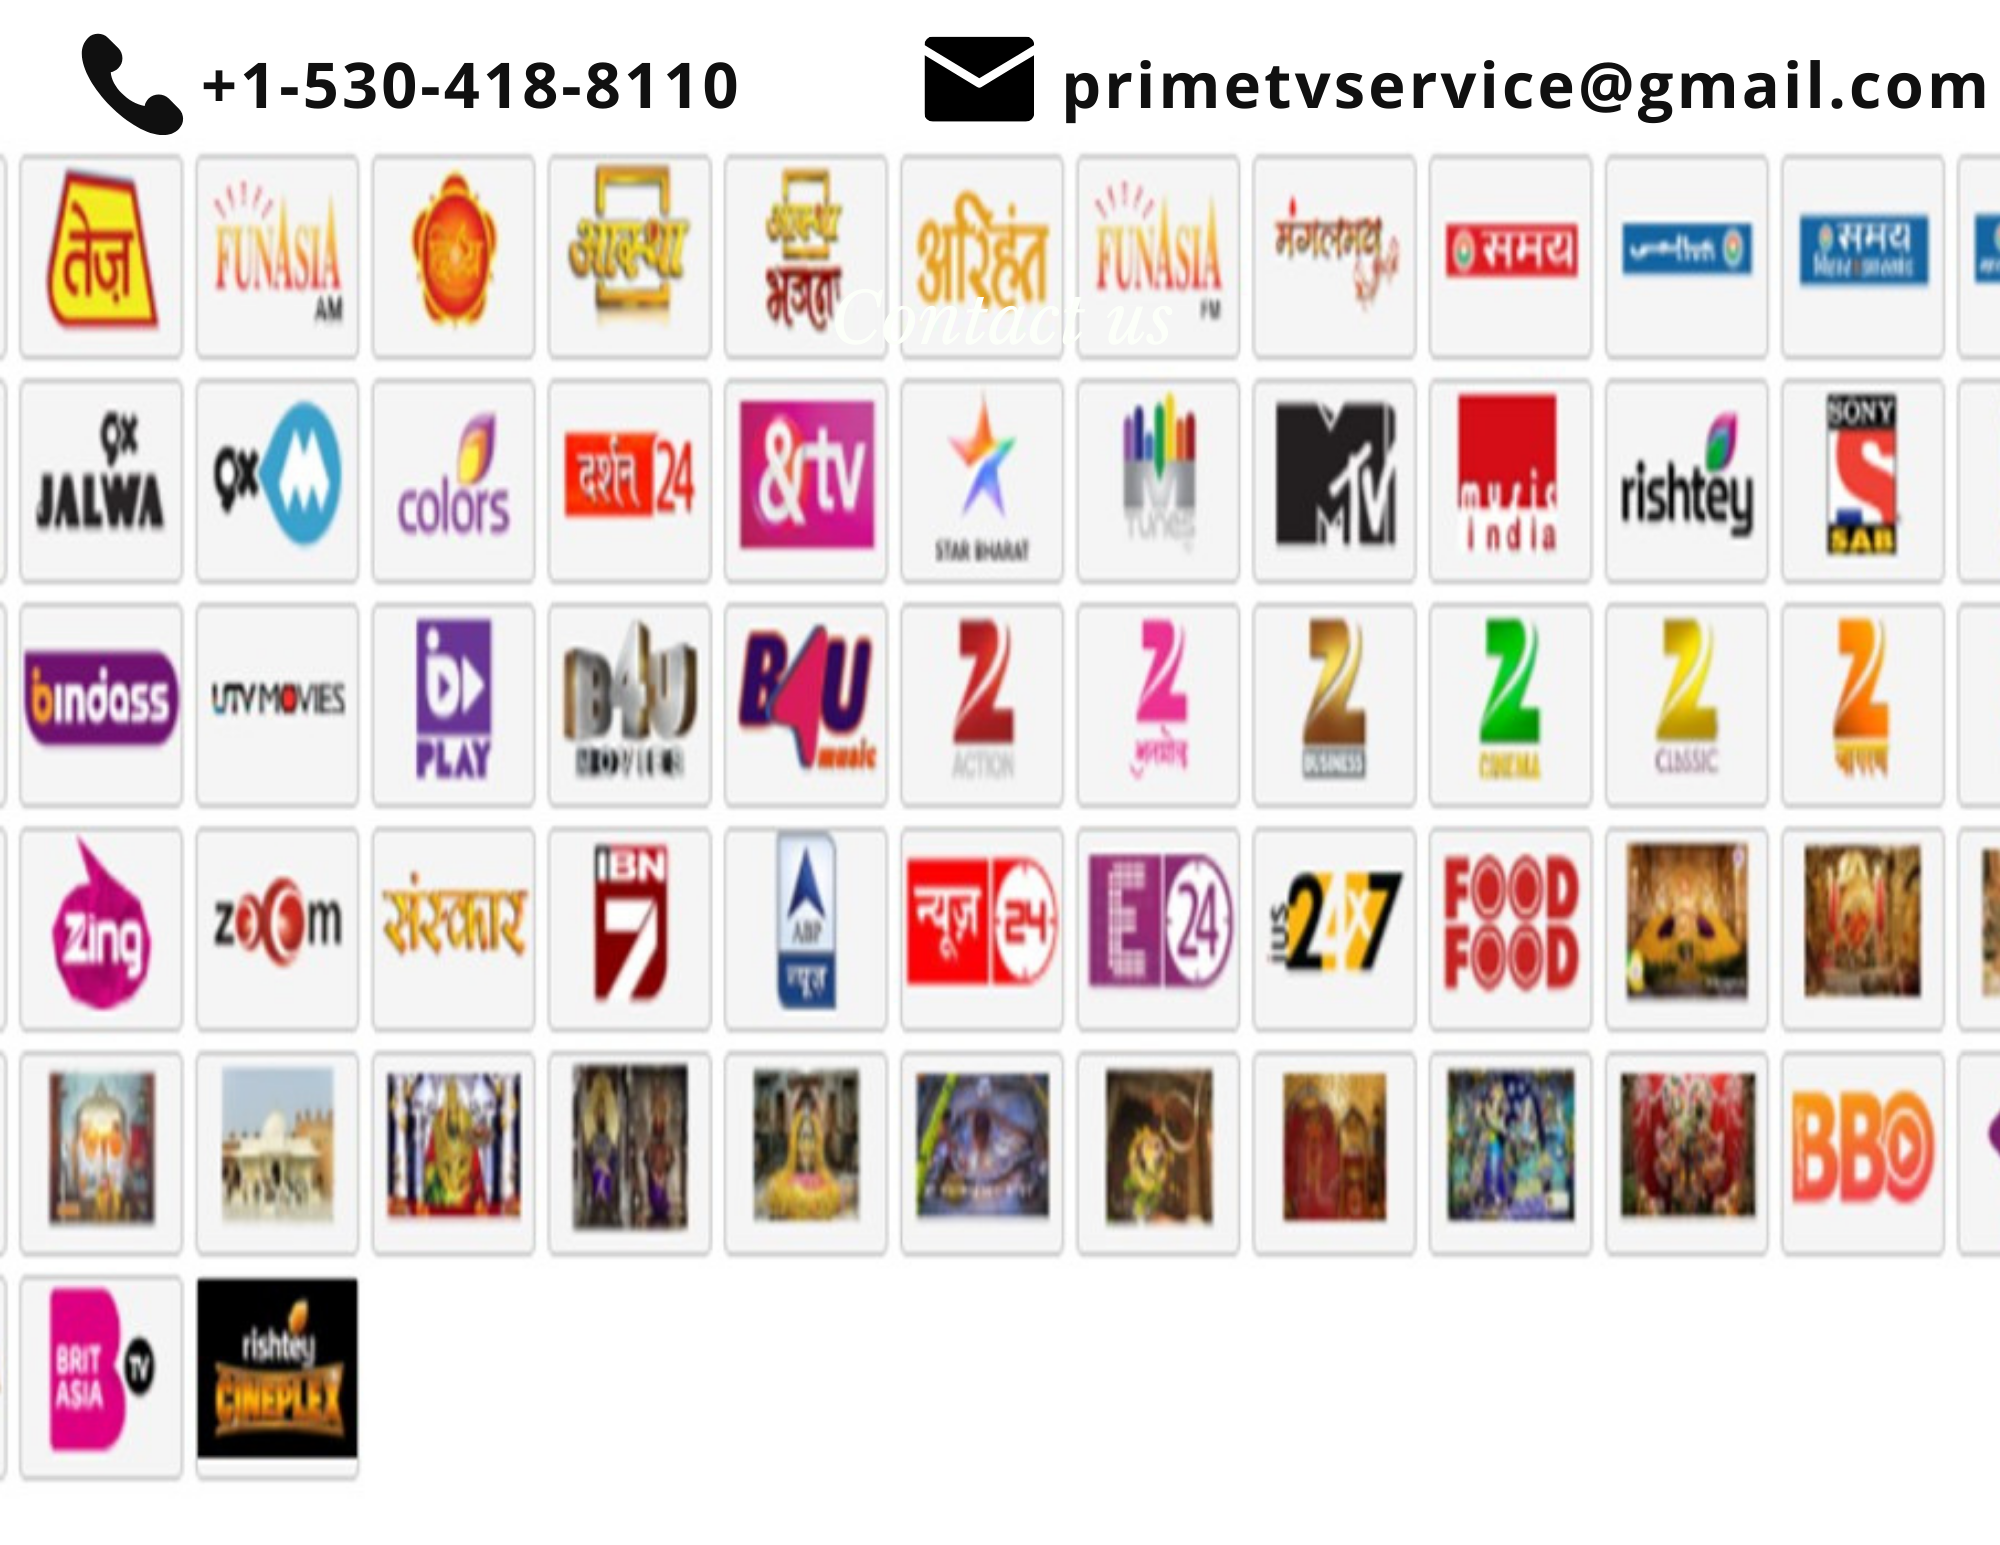 Prime Iptv service live channels watch in usa